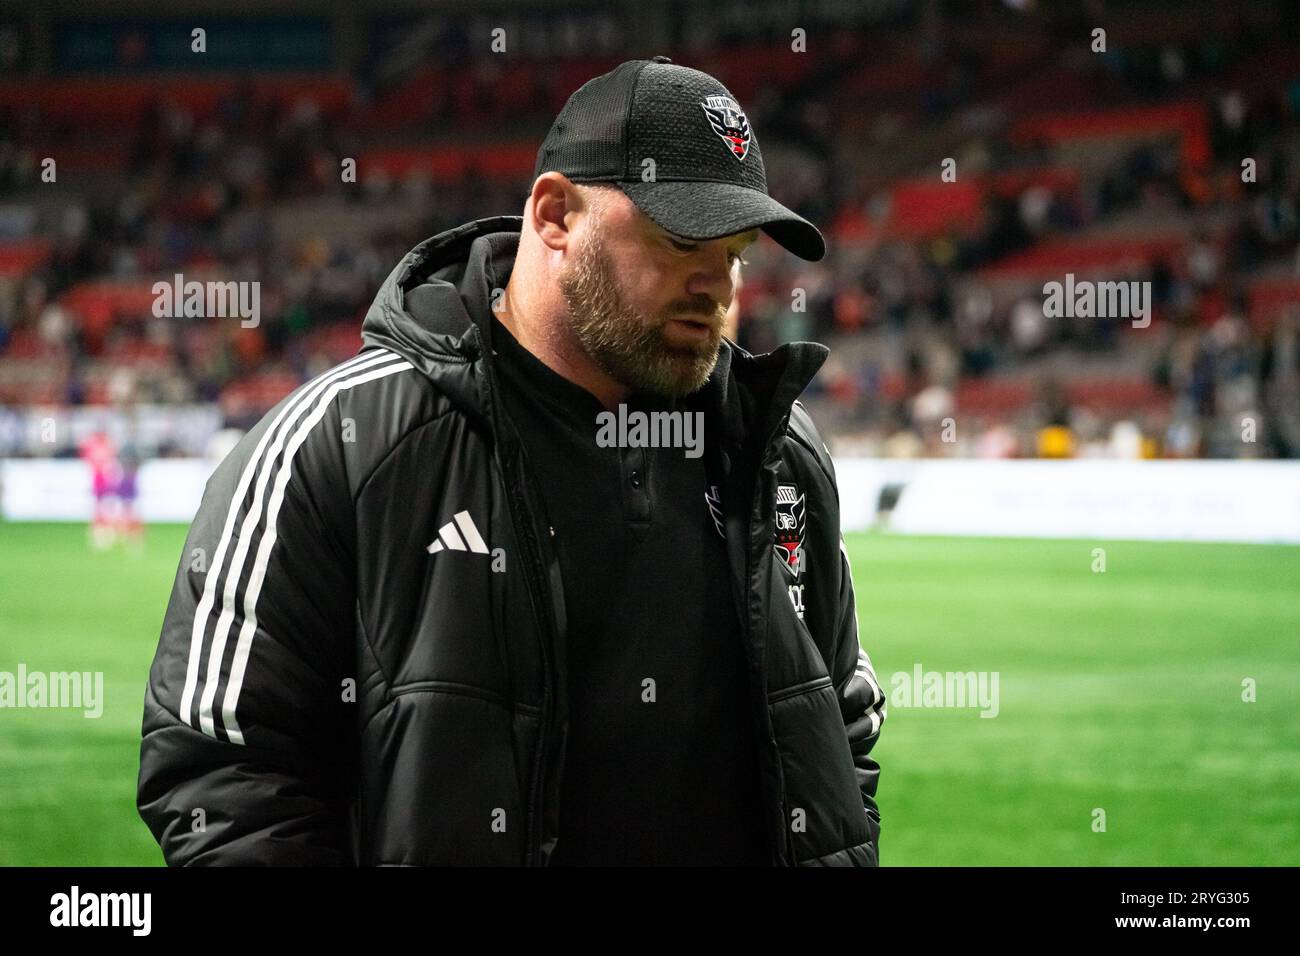 Vancouver, Canada. 30th Sep, 2023. Vancouver, British Columbia, Canada, September 30th 2023: Head Coach Wayne Rooney (D.C. United) exits the pitch after the Major League Soccer match between Vancouver Whitecaps FC and D.C. United at BC Place Stadium in Vancouver, British Columbia, Canada (EDITORIAL USAGE ONLY). (Amy Elle/SPP) Credit: SPP Sport Press Photo. /Alamy Live News Stock Photo